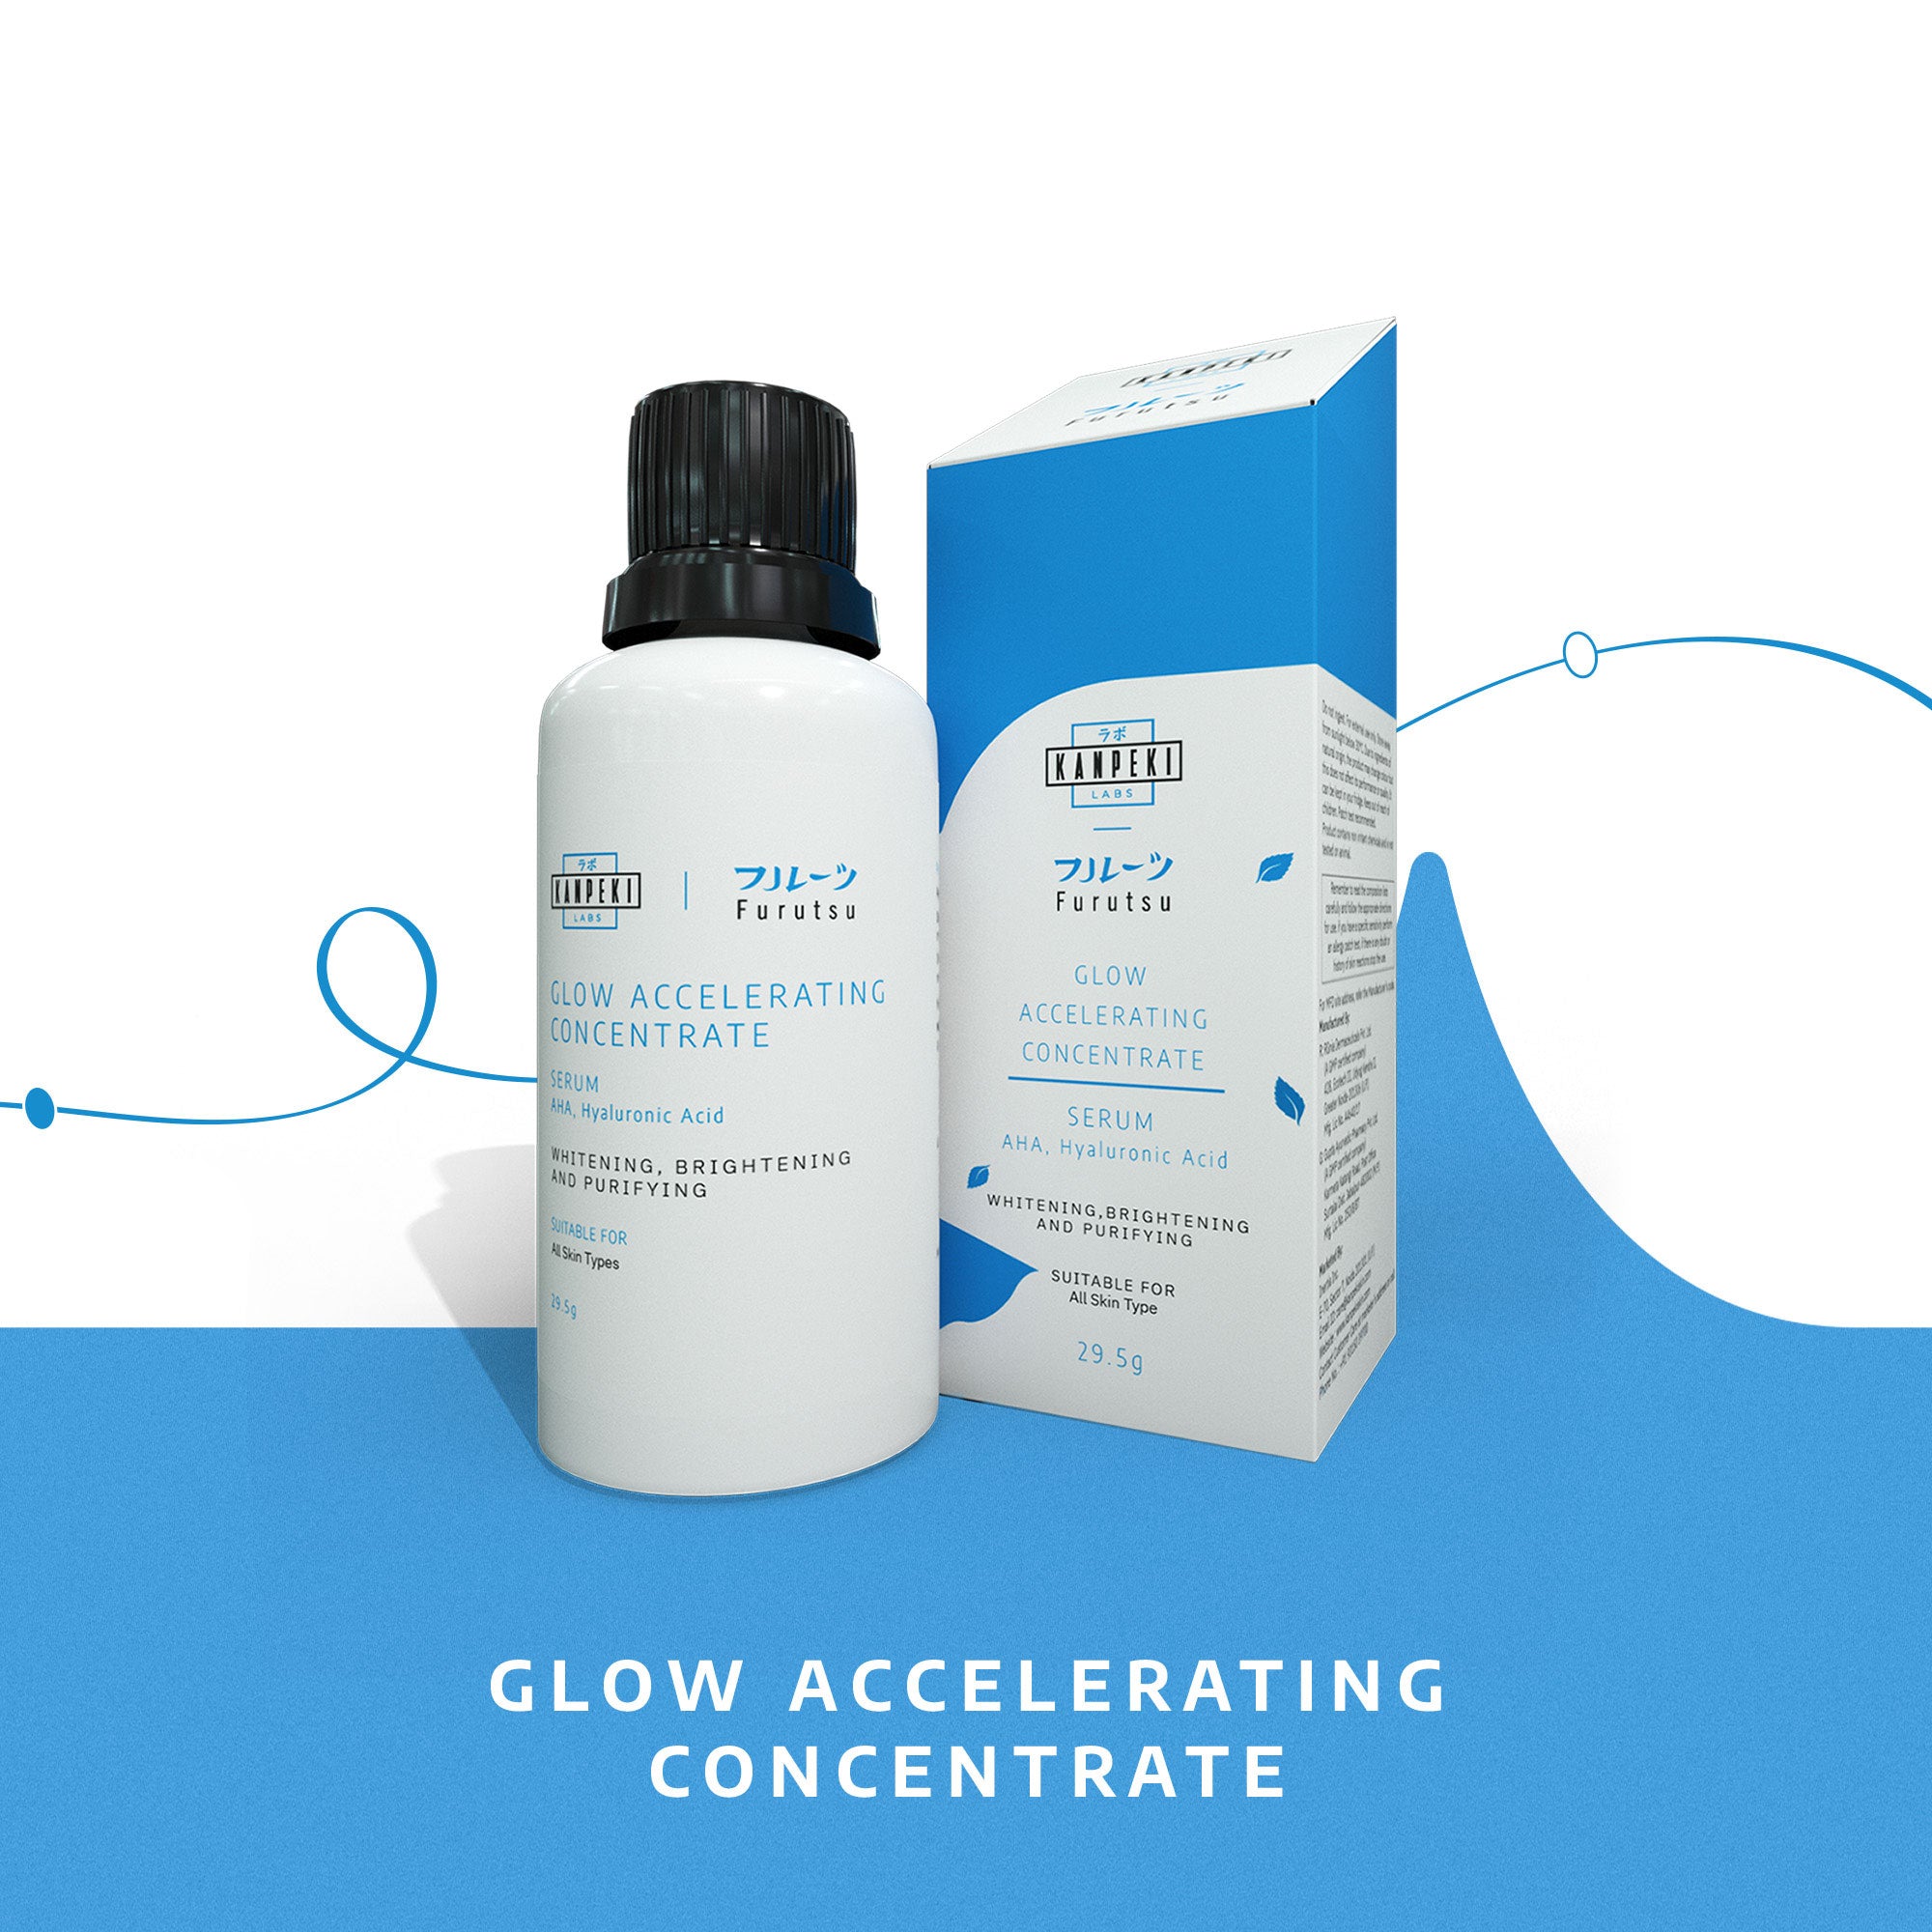 Glow Accelerating Concentrate